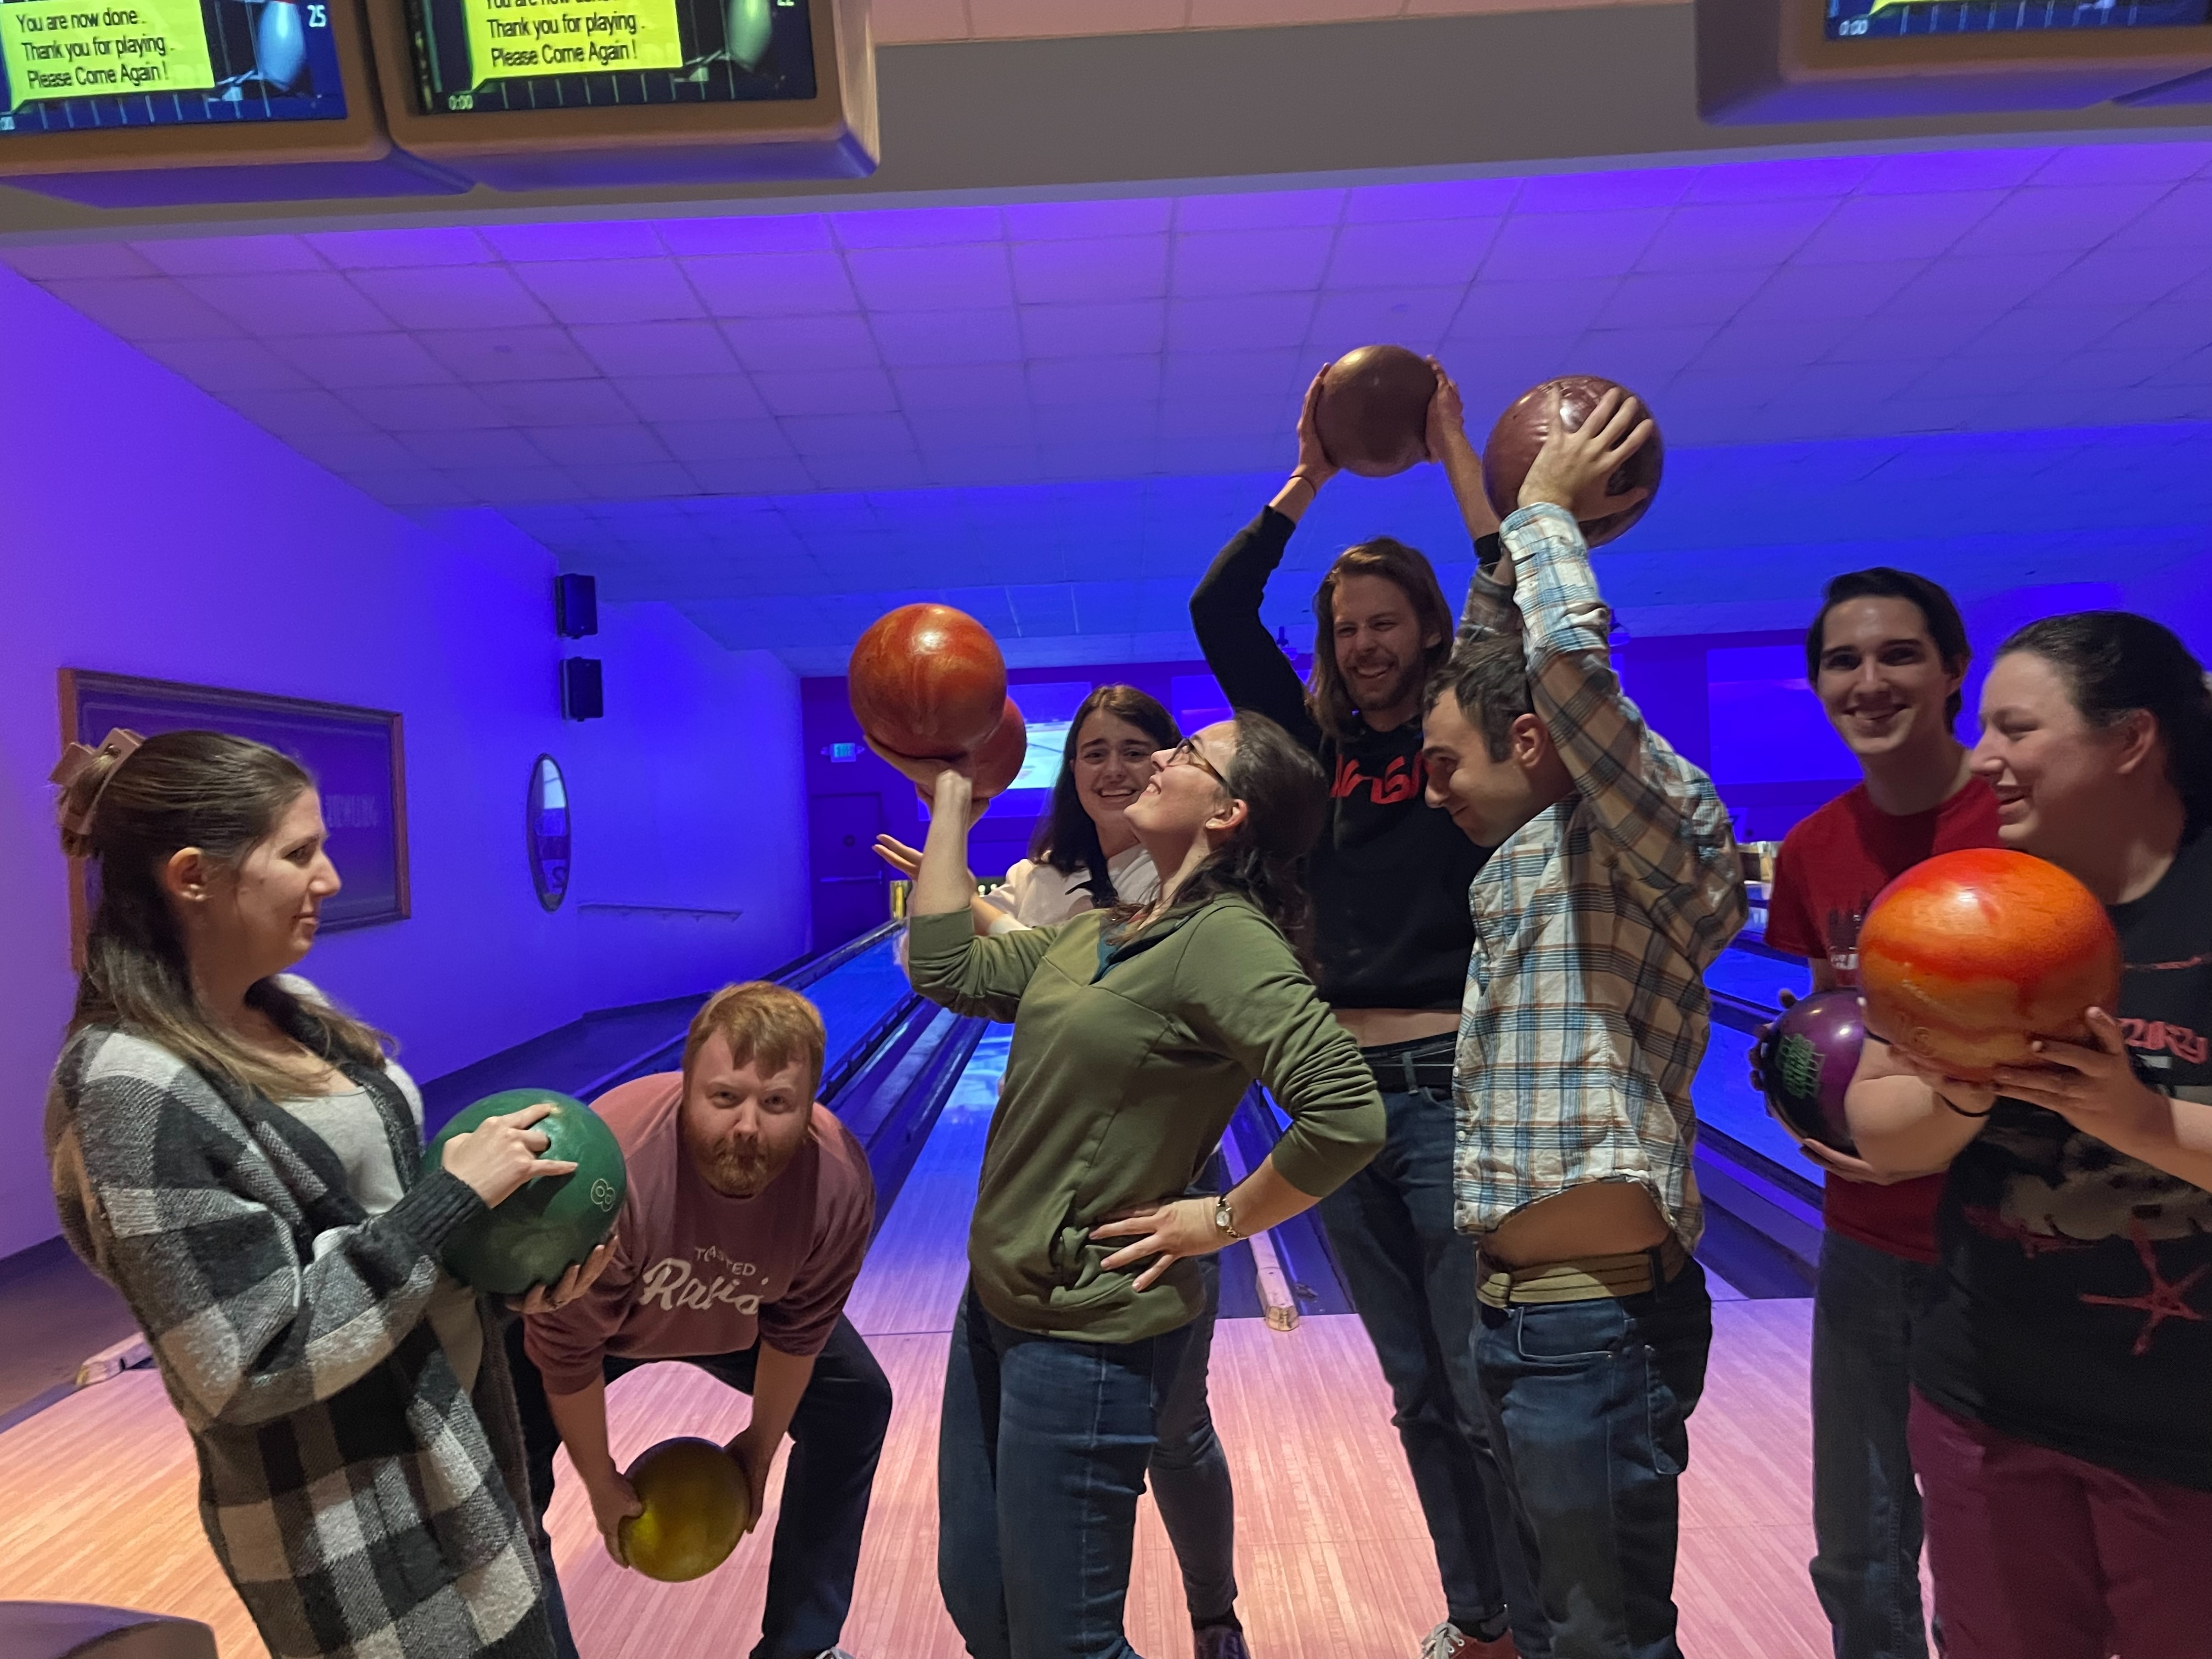 Alex Sabala's bowling welcome party